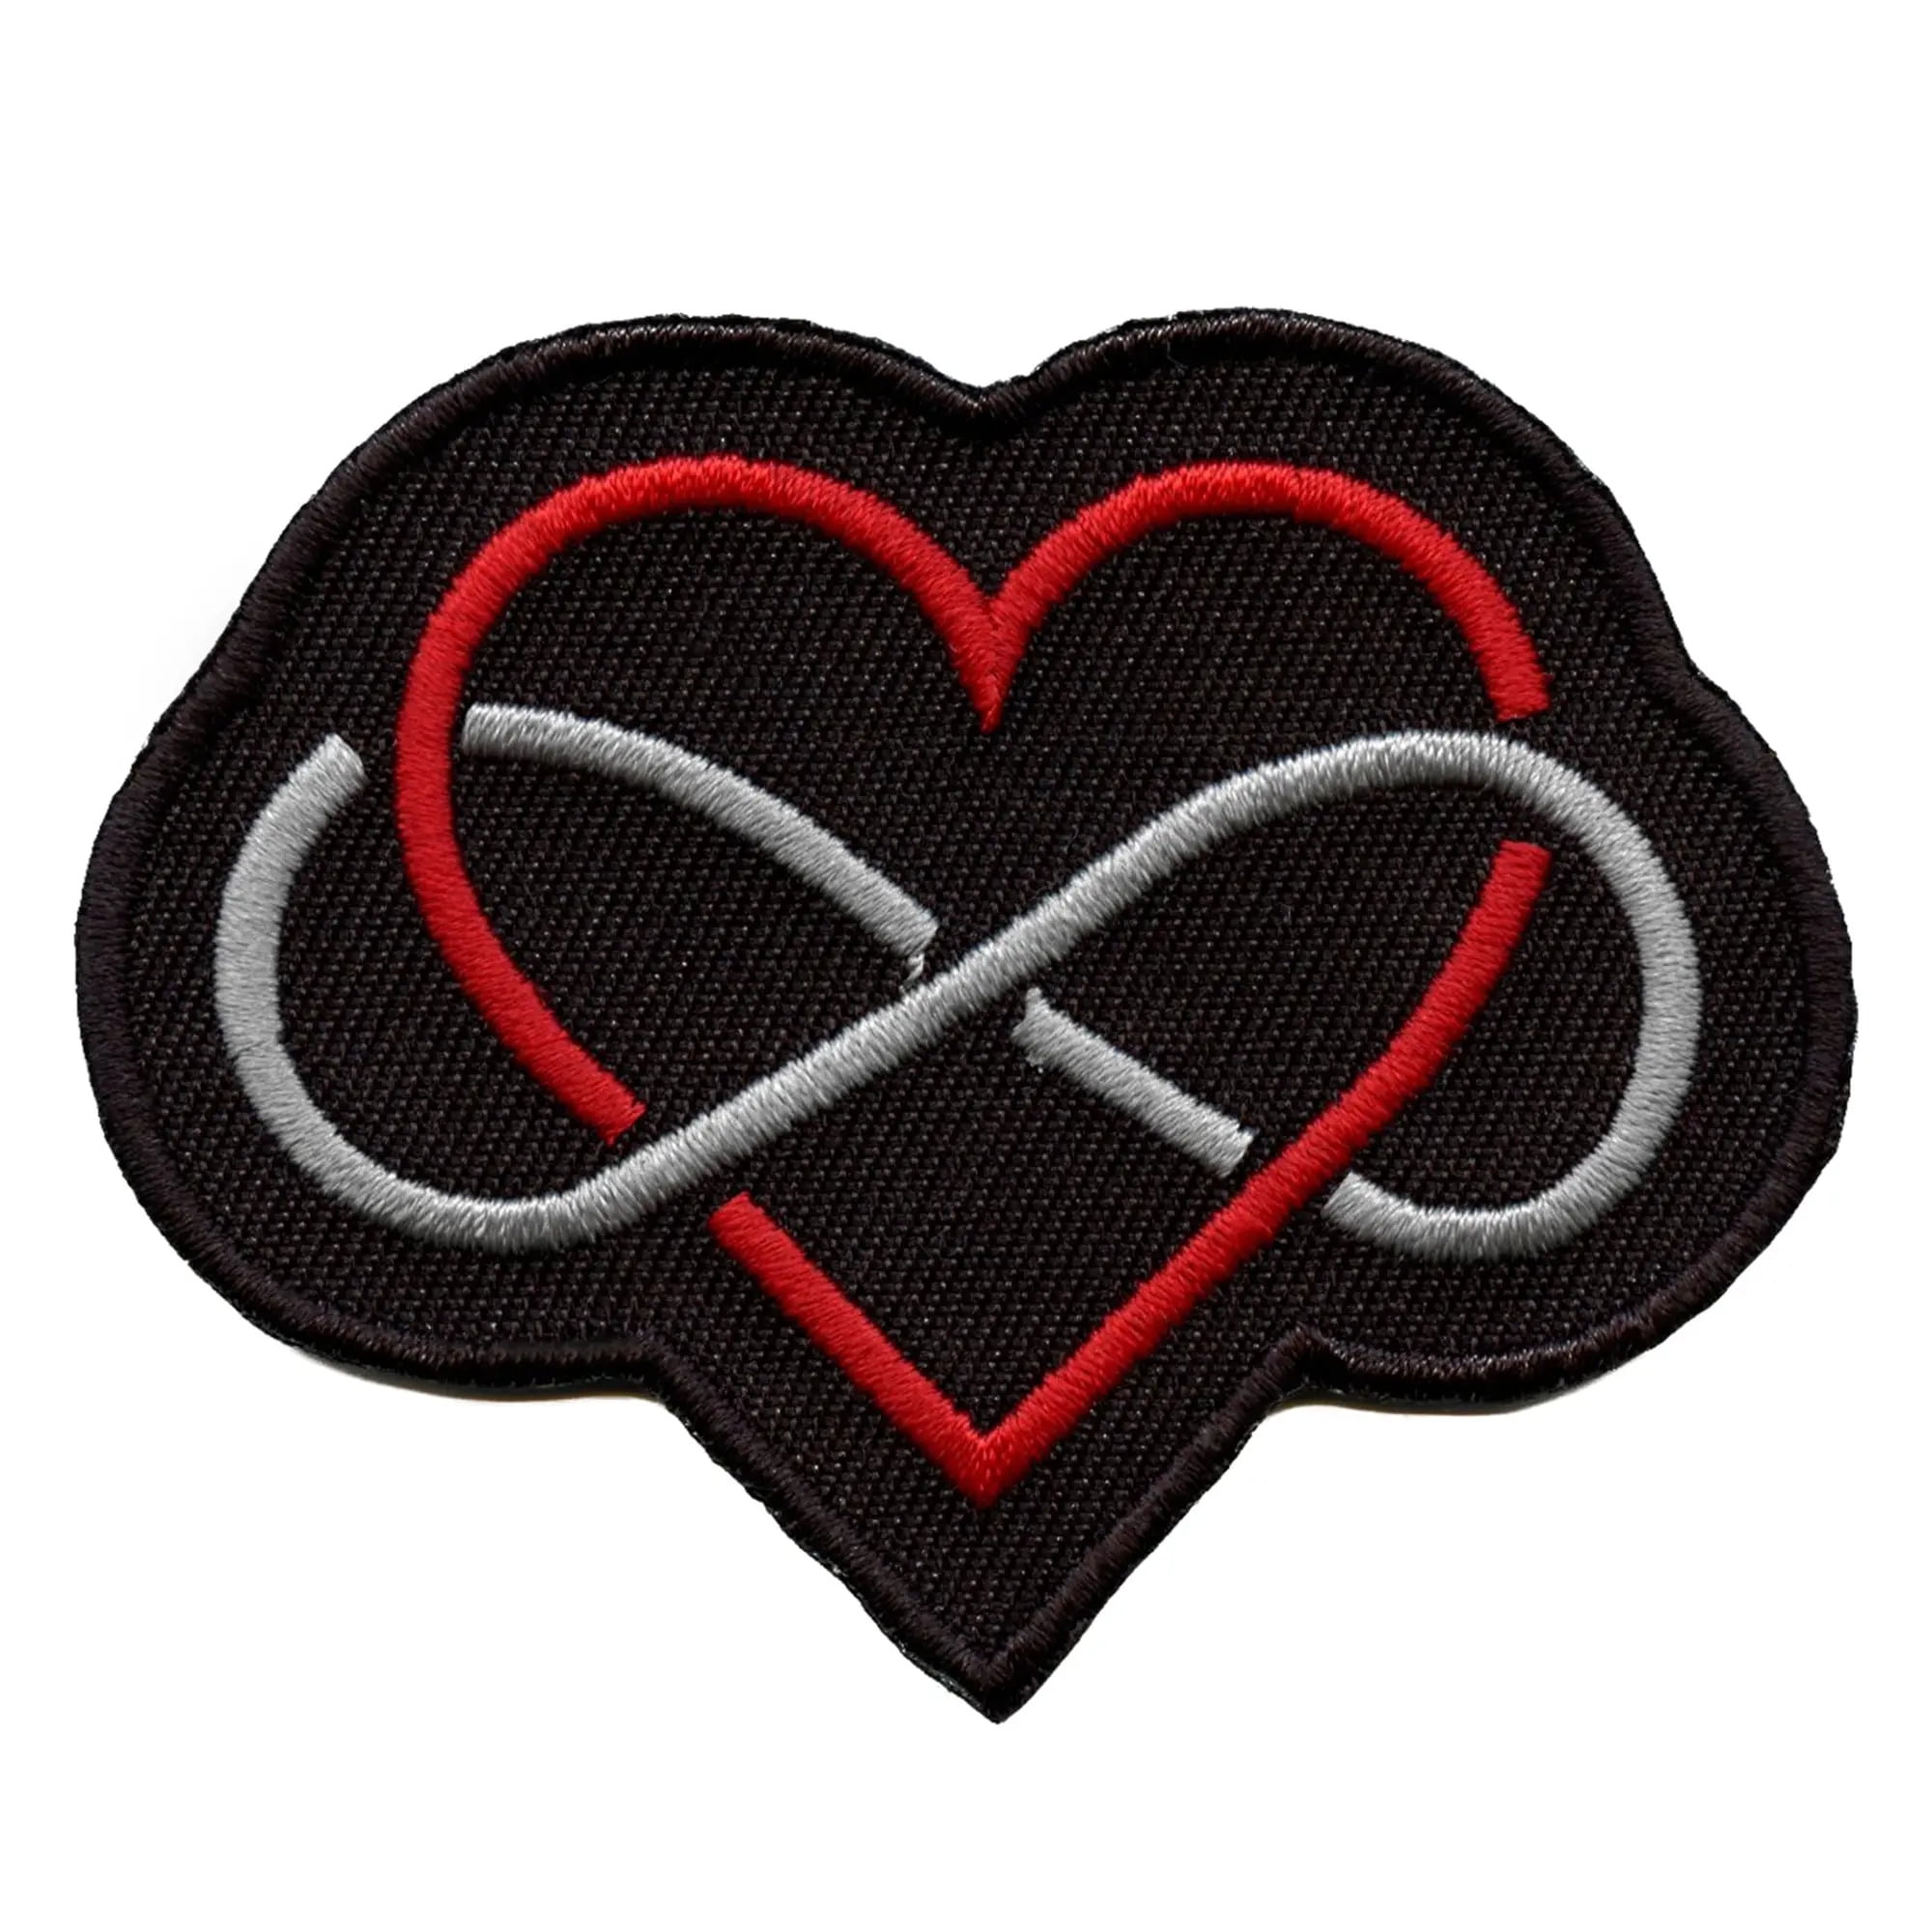 20pcs Iron On Denim Patches, EEEkit No-Sew Jeans Patches for Clothing,  Adhesive Sewing Patches with 5 Assorted Colors